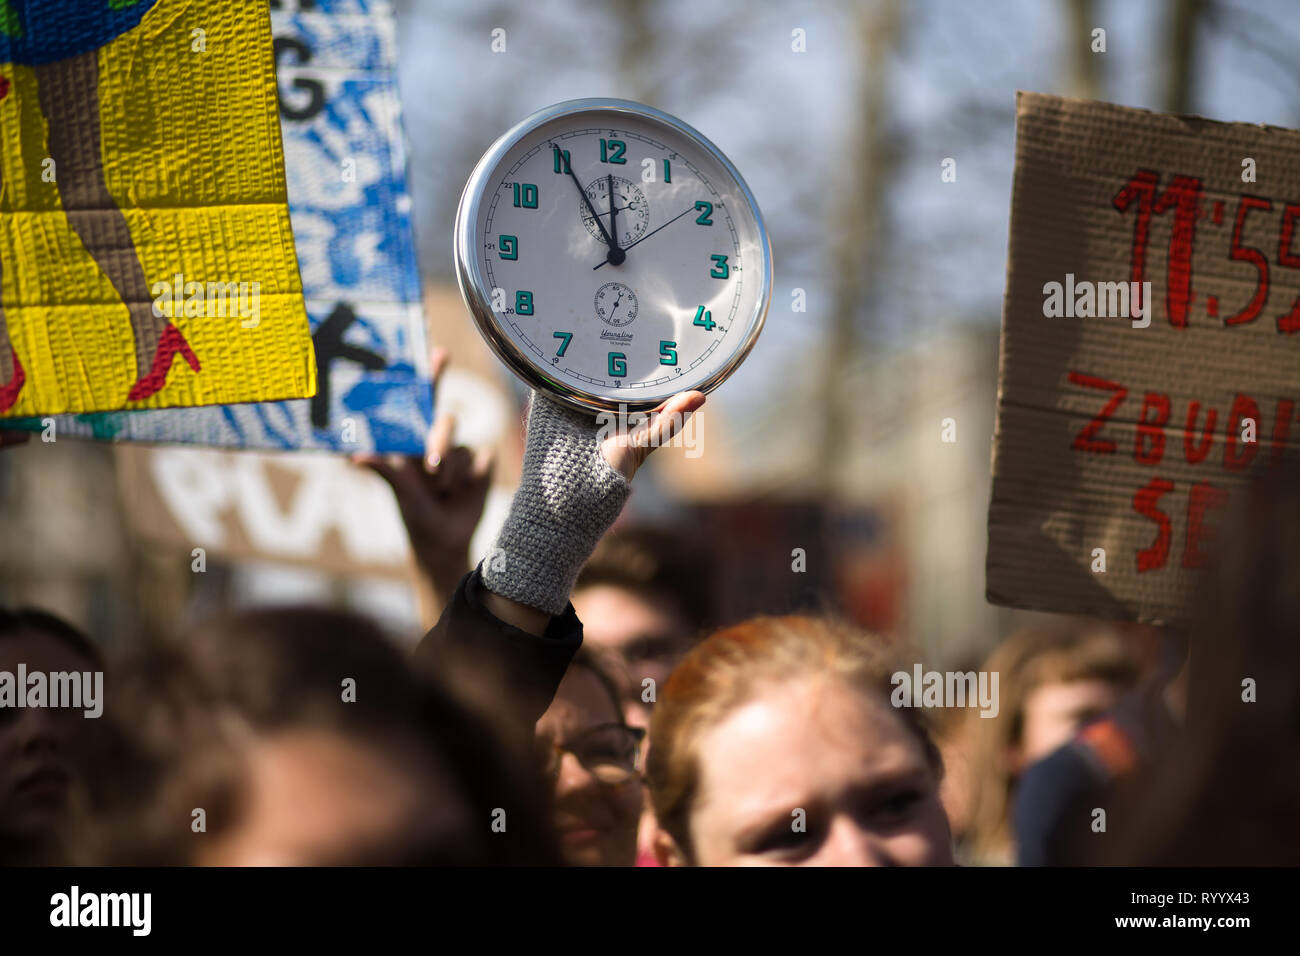 Slovenia, Slovenia. 15th Mar, 2019. A protestor holds up a clock implying a high time to act, during a youth climate strike in Ljubljana, Slovenia, on March 15, 2019. Around 5,000 students on Friday protested against inaction on climate change in Ljubljana, as part of a global youth climate strike. Credit: Luka Dakskobler/Xinhua/Alamy Live News Stock Photo